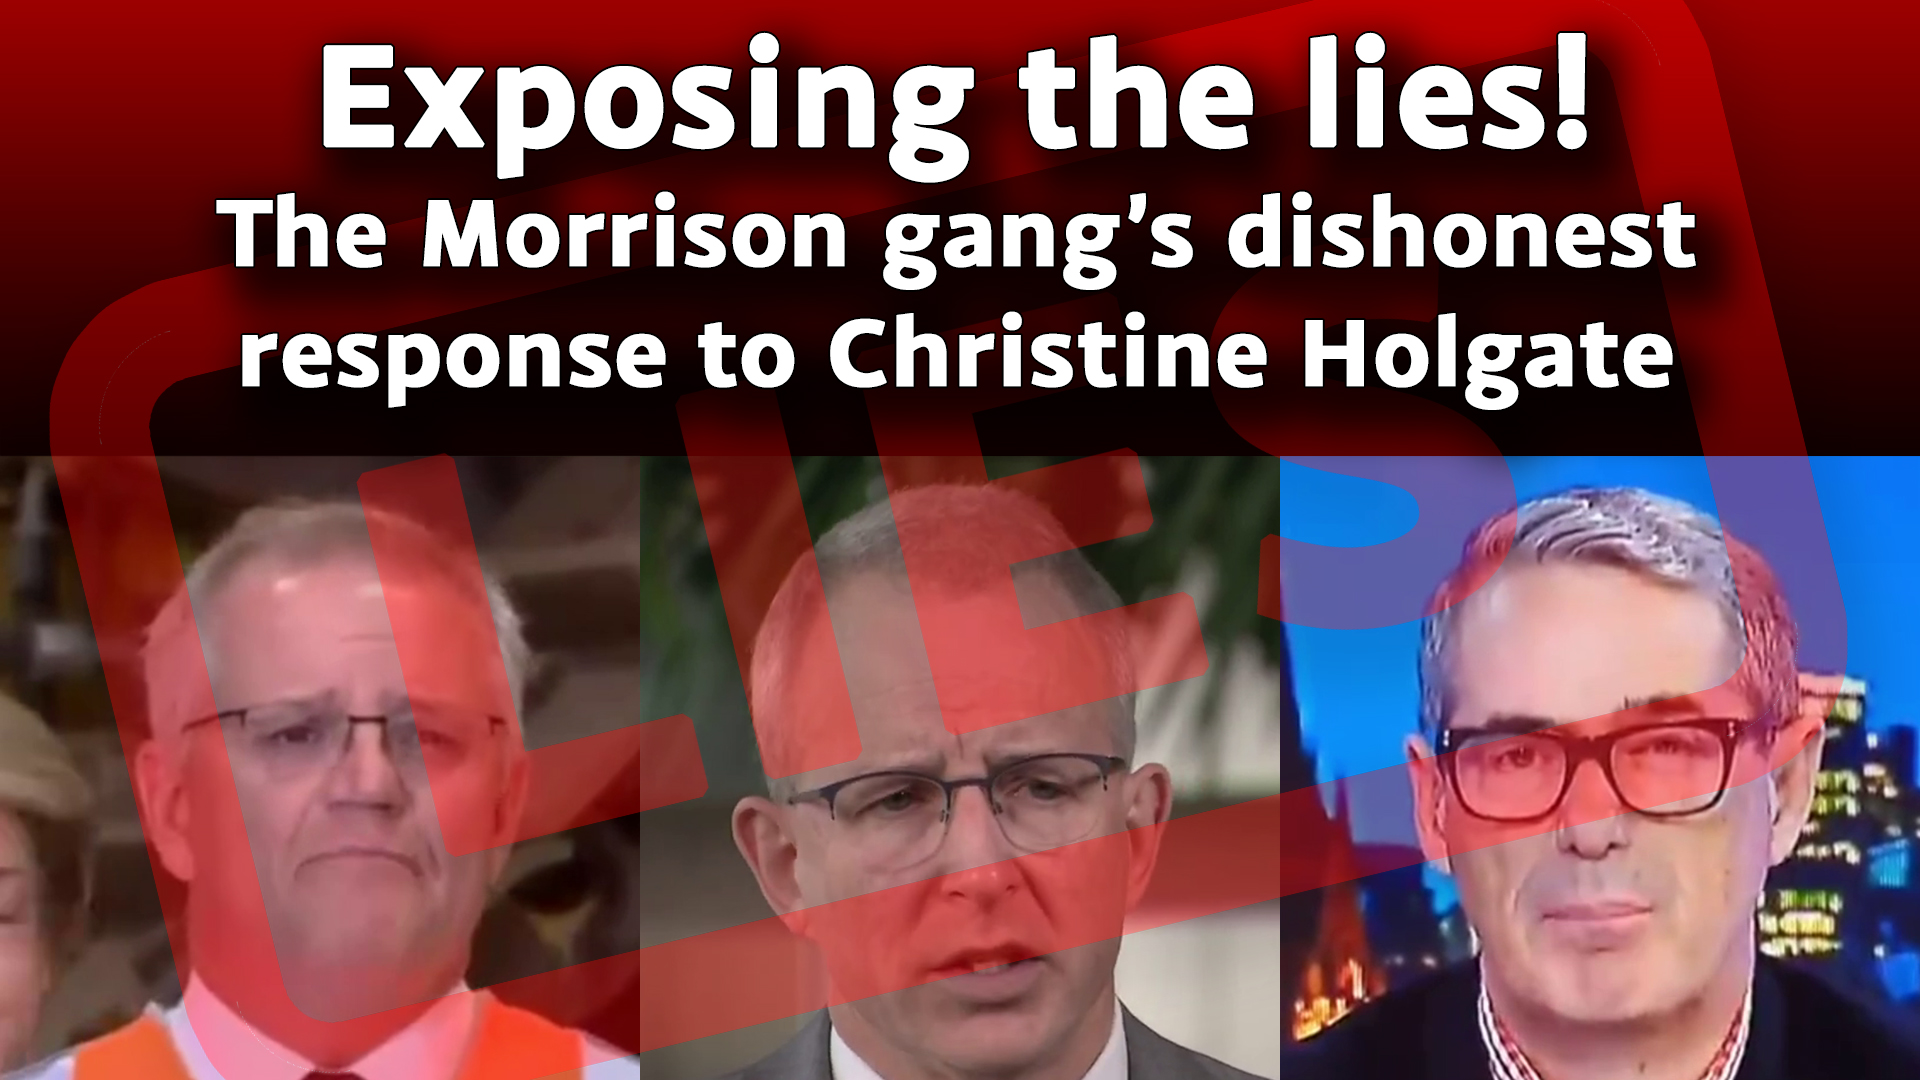 Exposing the lies! The Morrison gang’s dishonest response to Christine Holgate